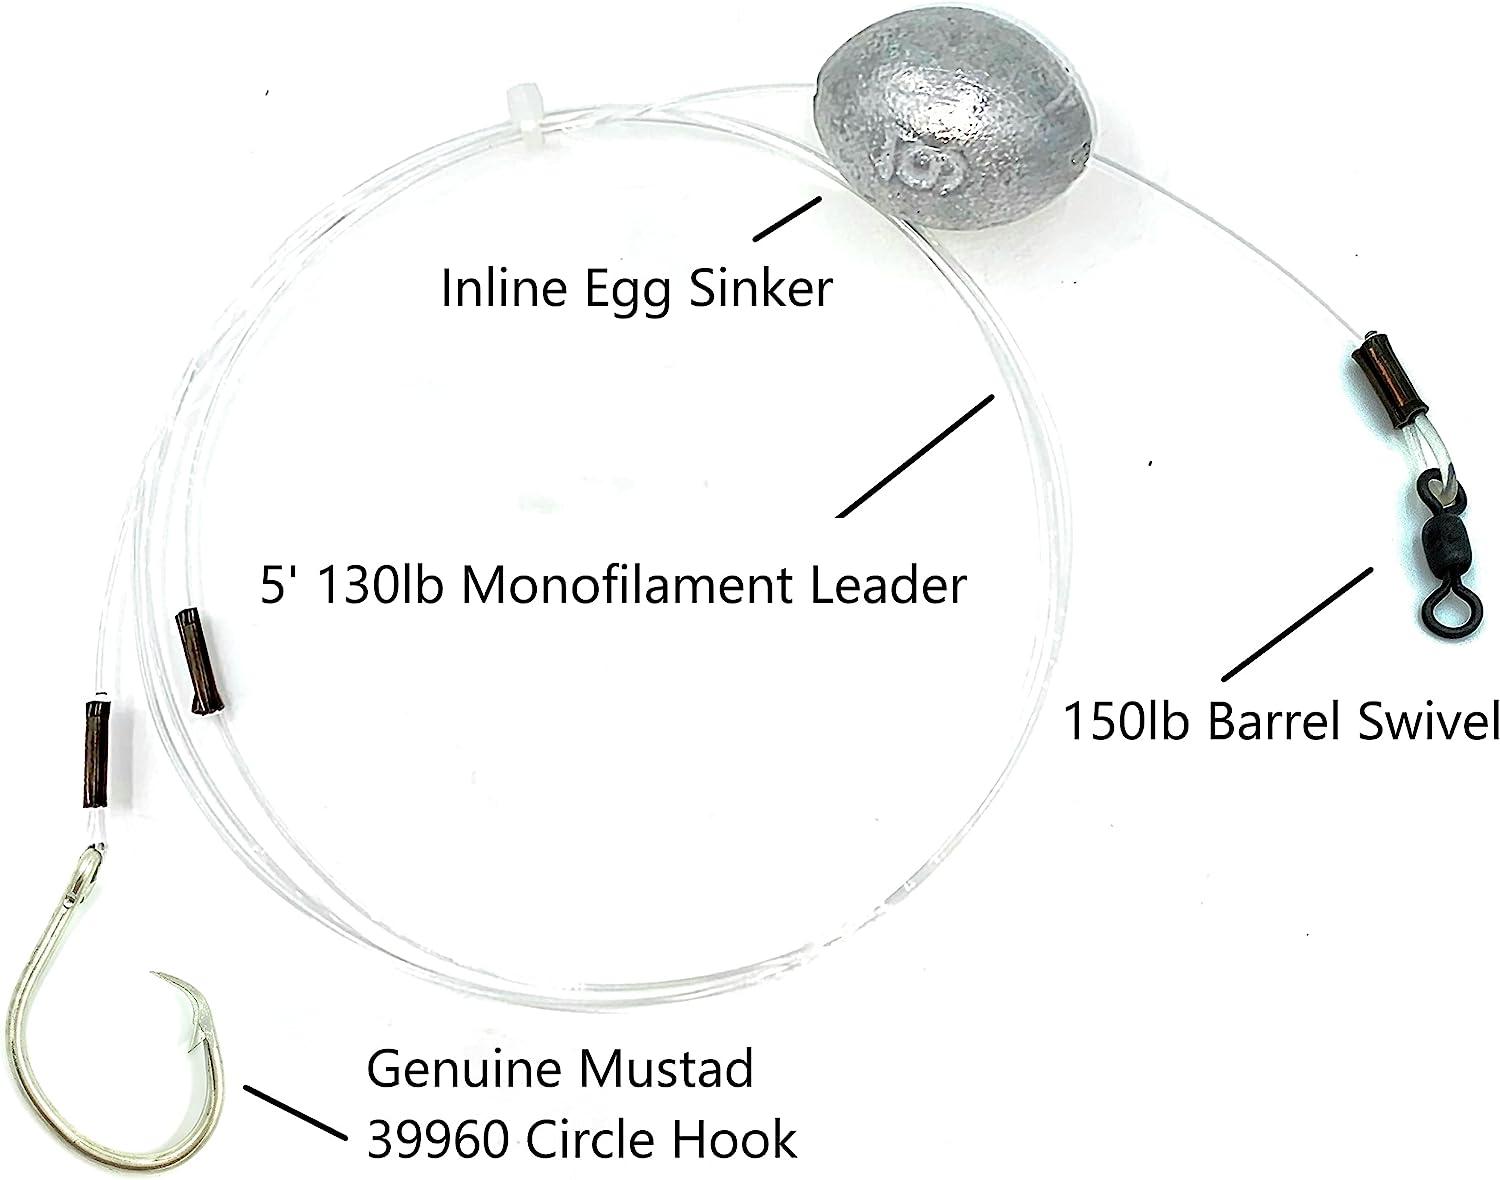 Snapper Fishing Rig, Leader with Egg Sinker, Weighted Grouper Rig, Made in  The USA, Inline Circle Hook Compliant, Excellent for Snapper, Grouper,  Amberjack, Snook, Red Drum 12/0 Hook - 4oz